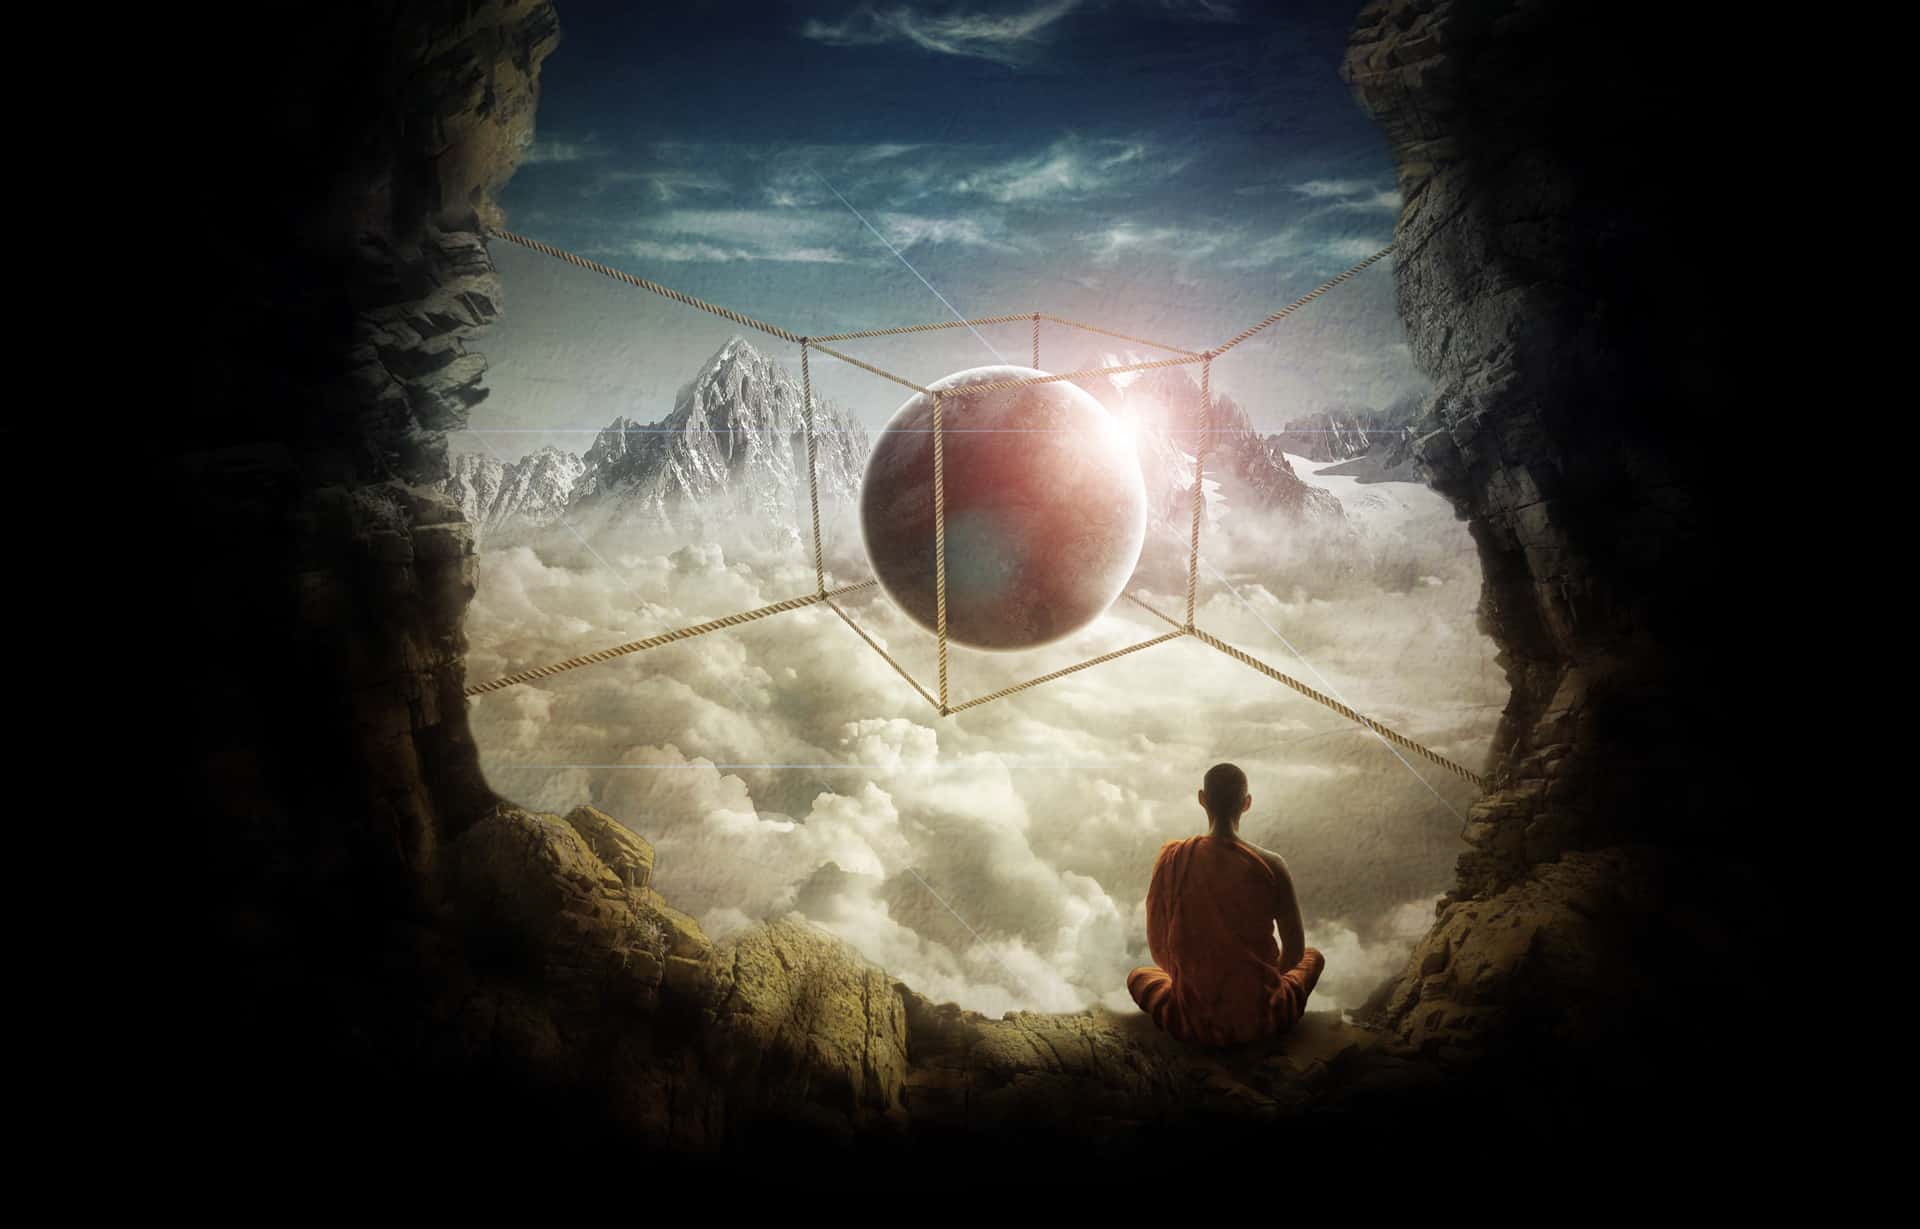 Create a Surreal Photo Manipulation of a Monk in the Caves